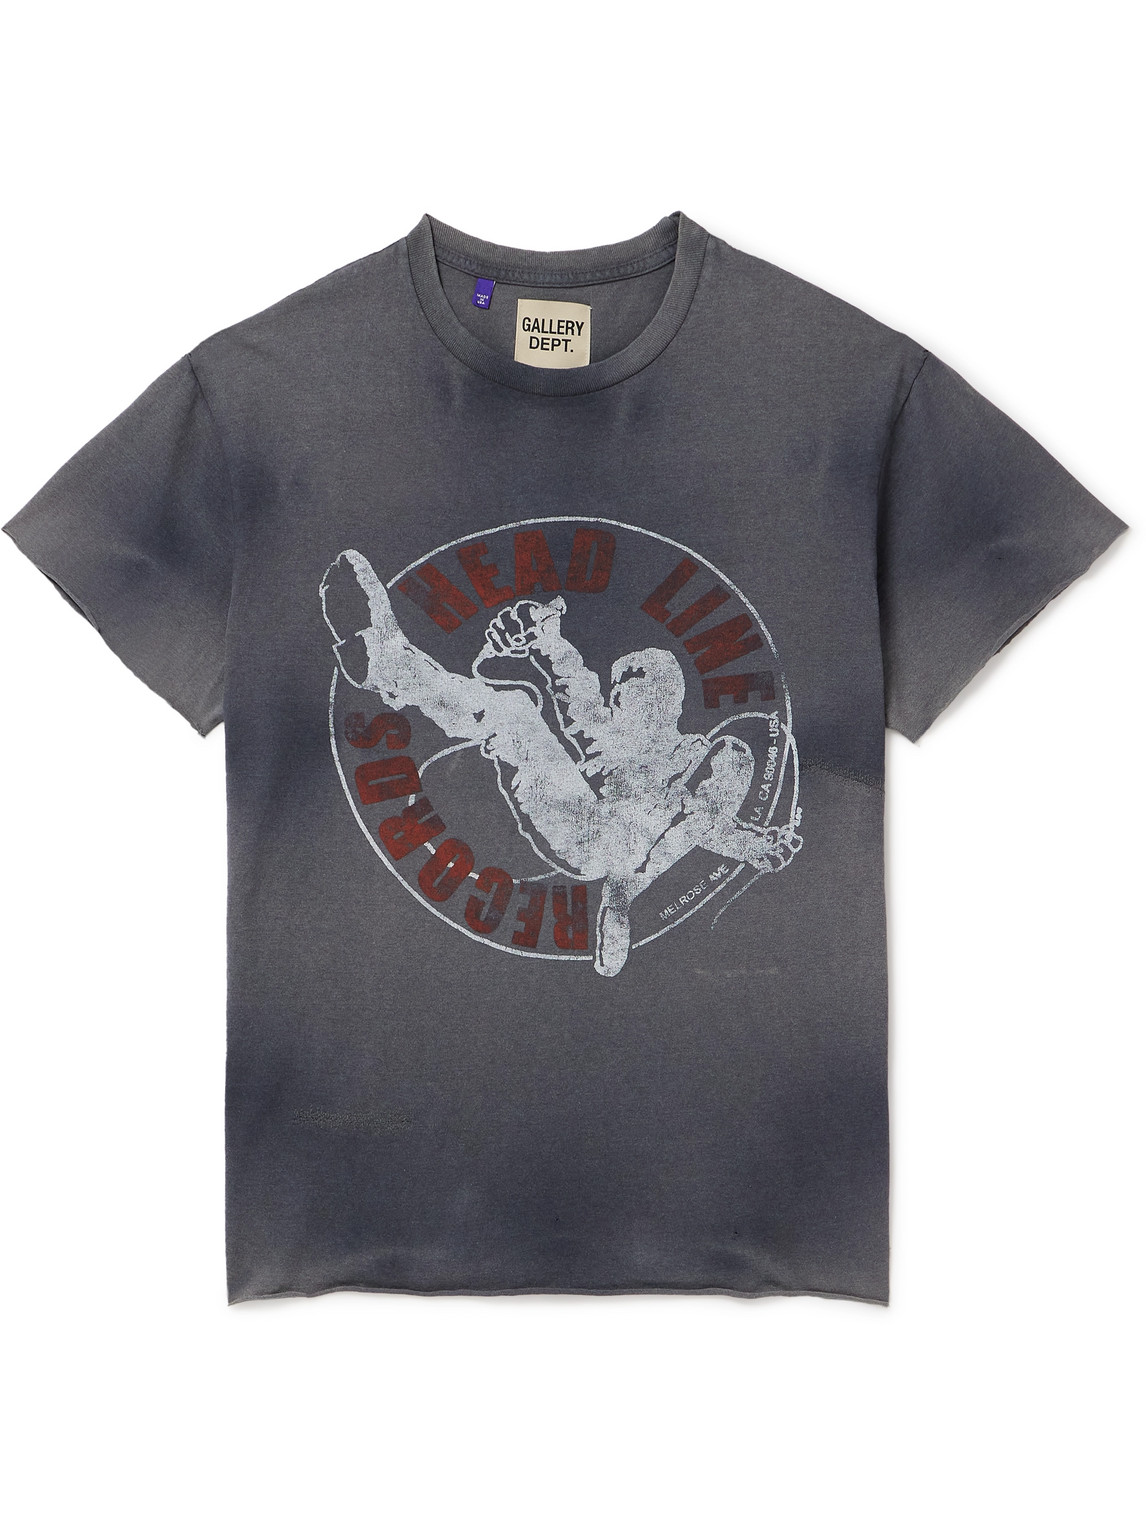 Gallery Dept. Headline Records Distressed Printed Glittered Cotton-jersey T-shirt In Black